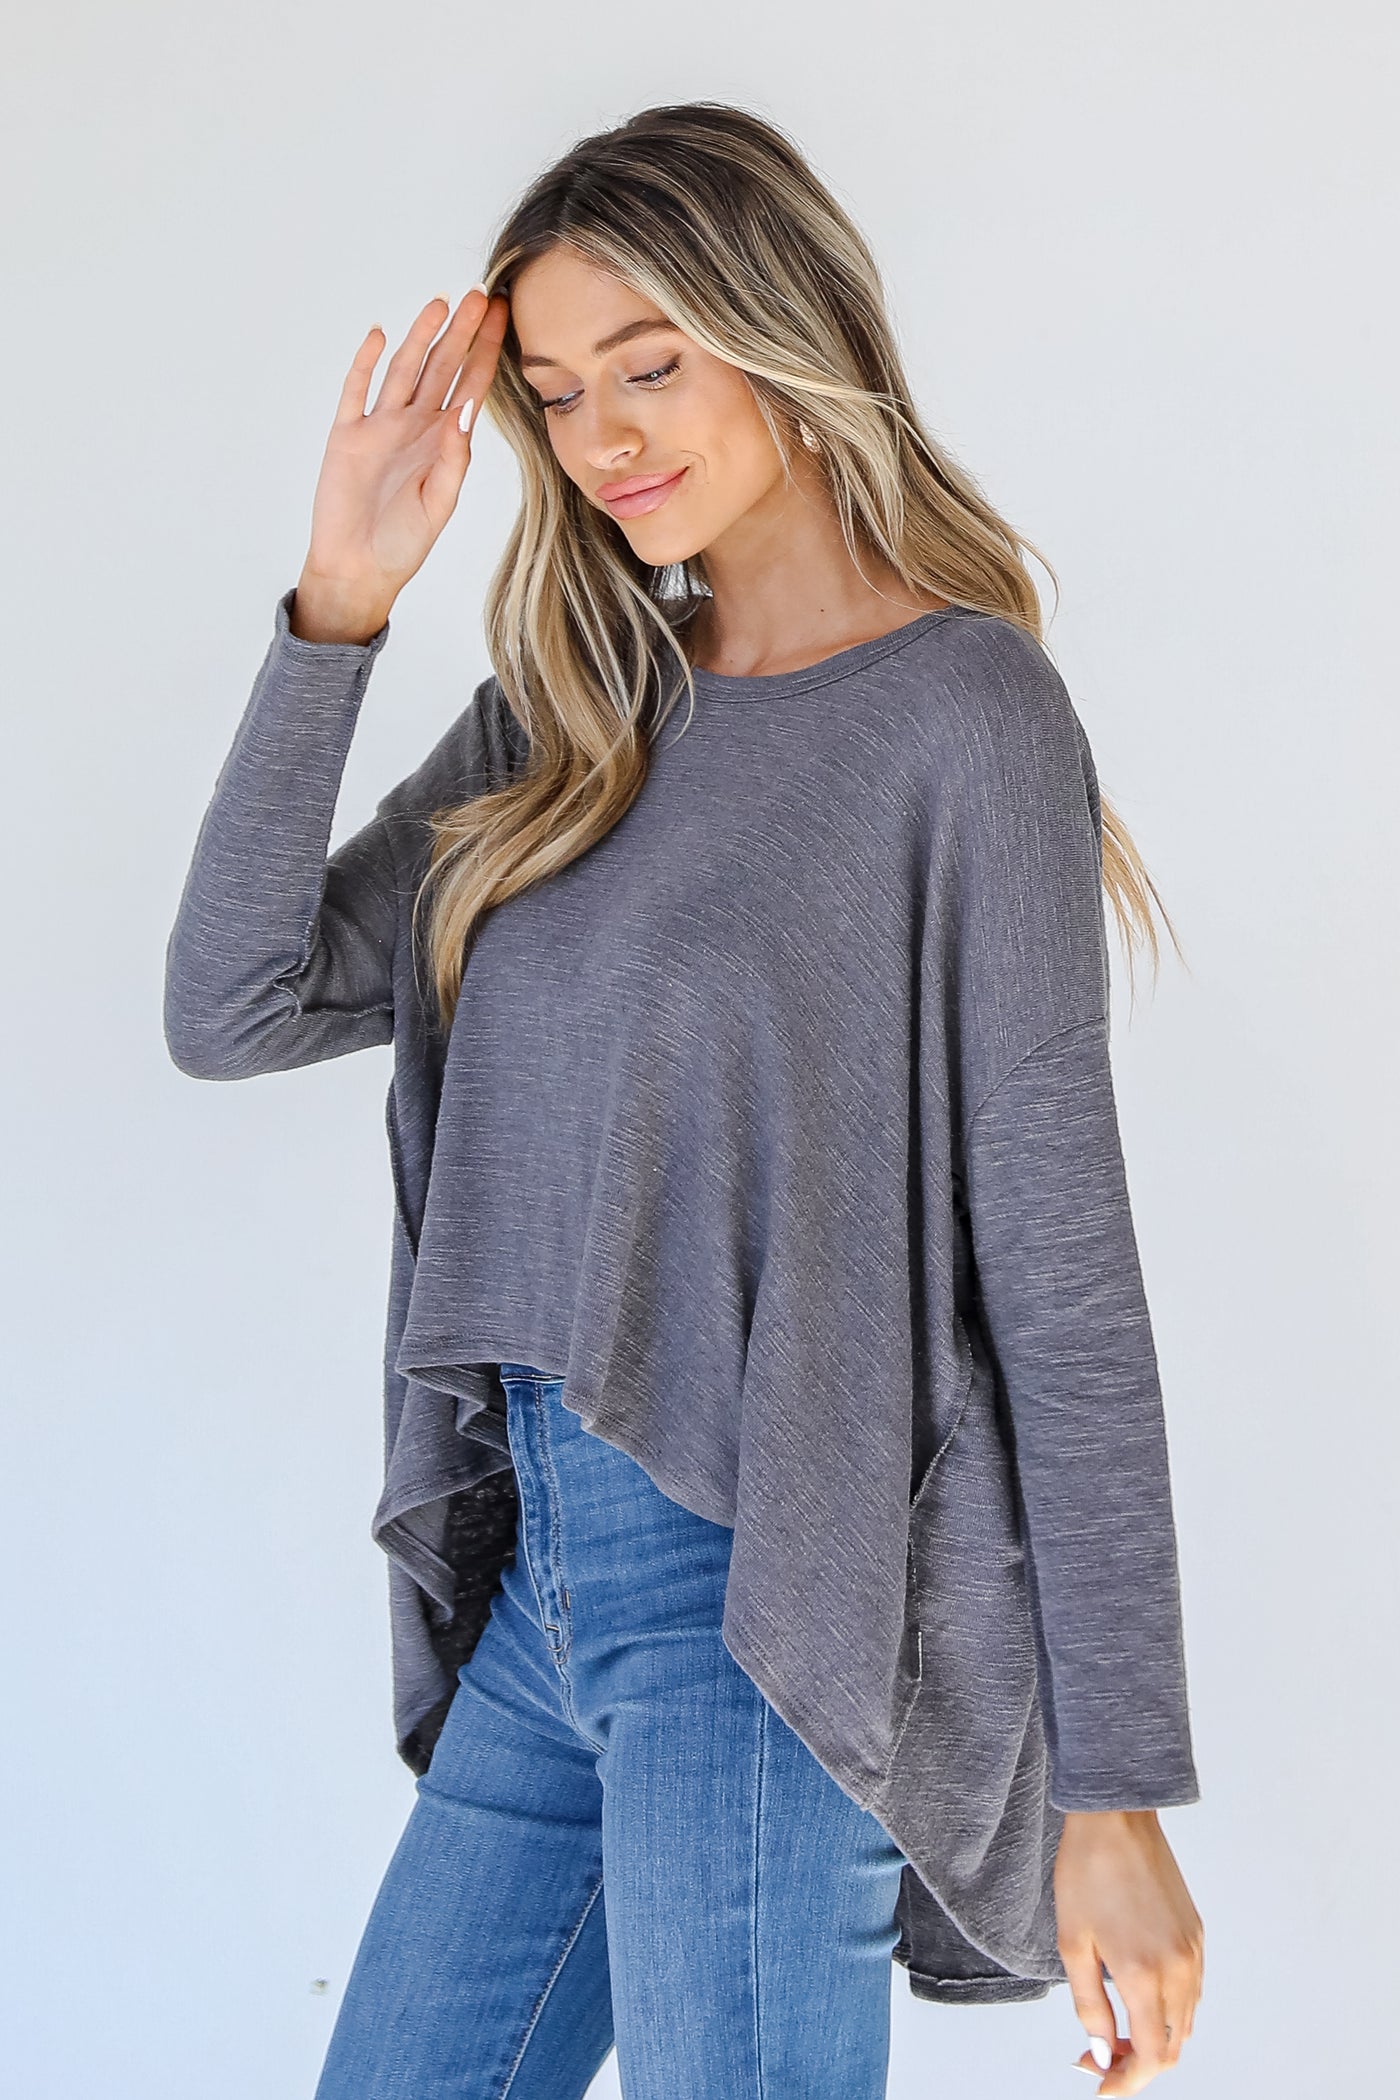 Oversized Knit Top side view